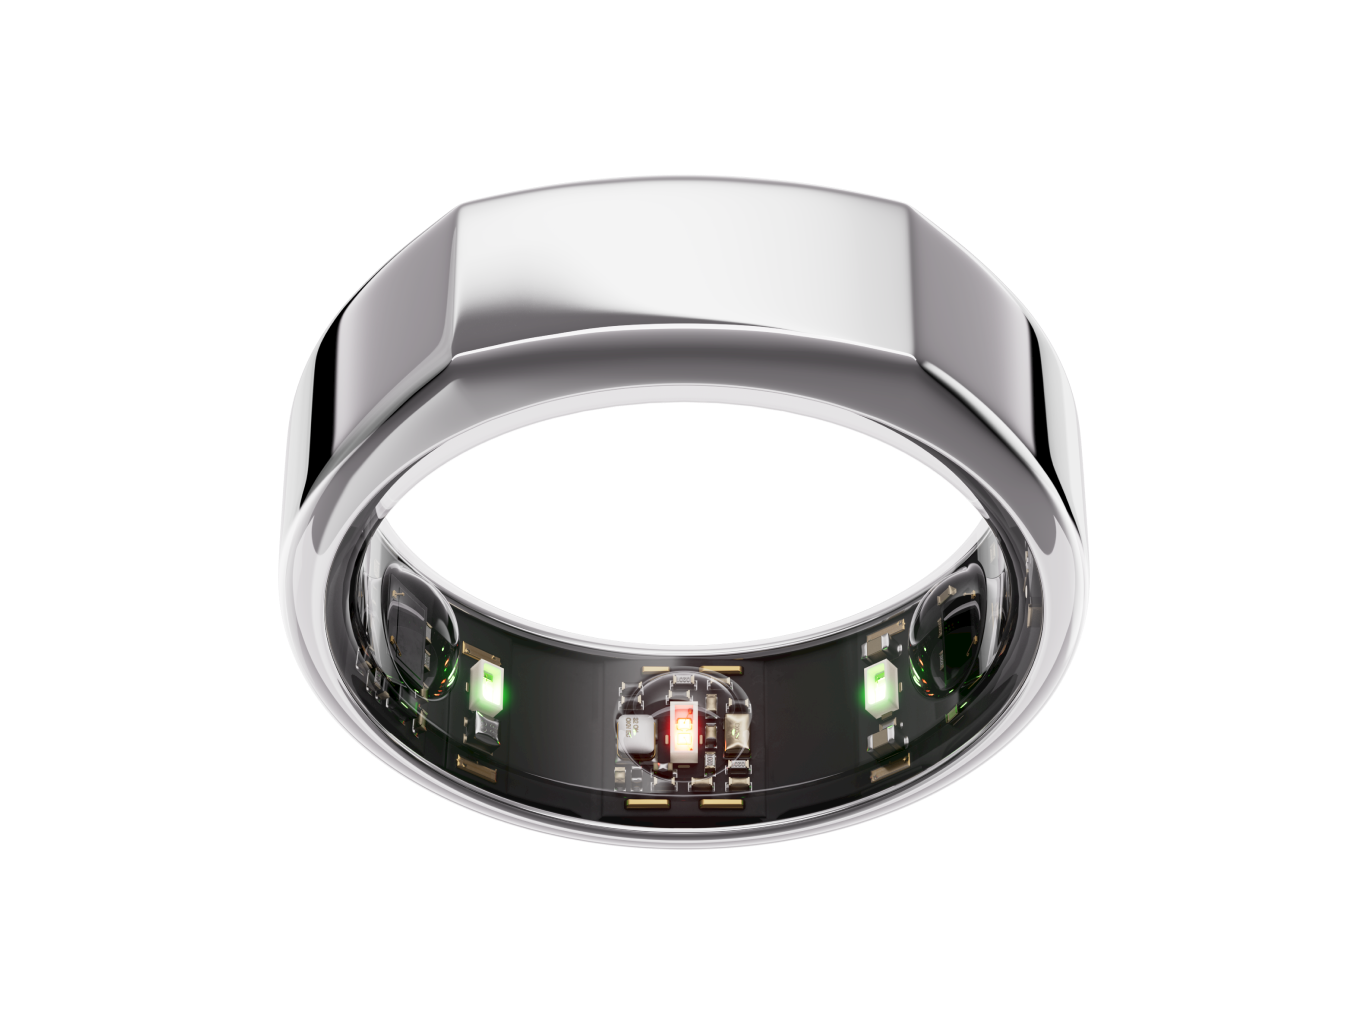 Oura Ring Review 2023: A Smart Ring With Health Data and Tracking